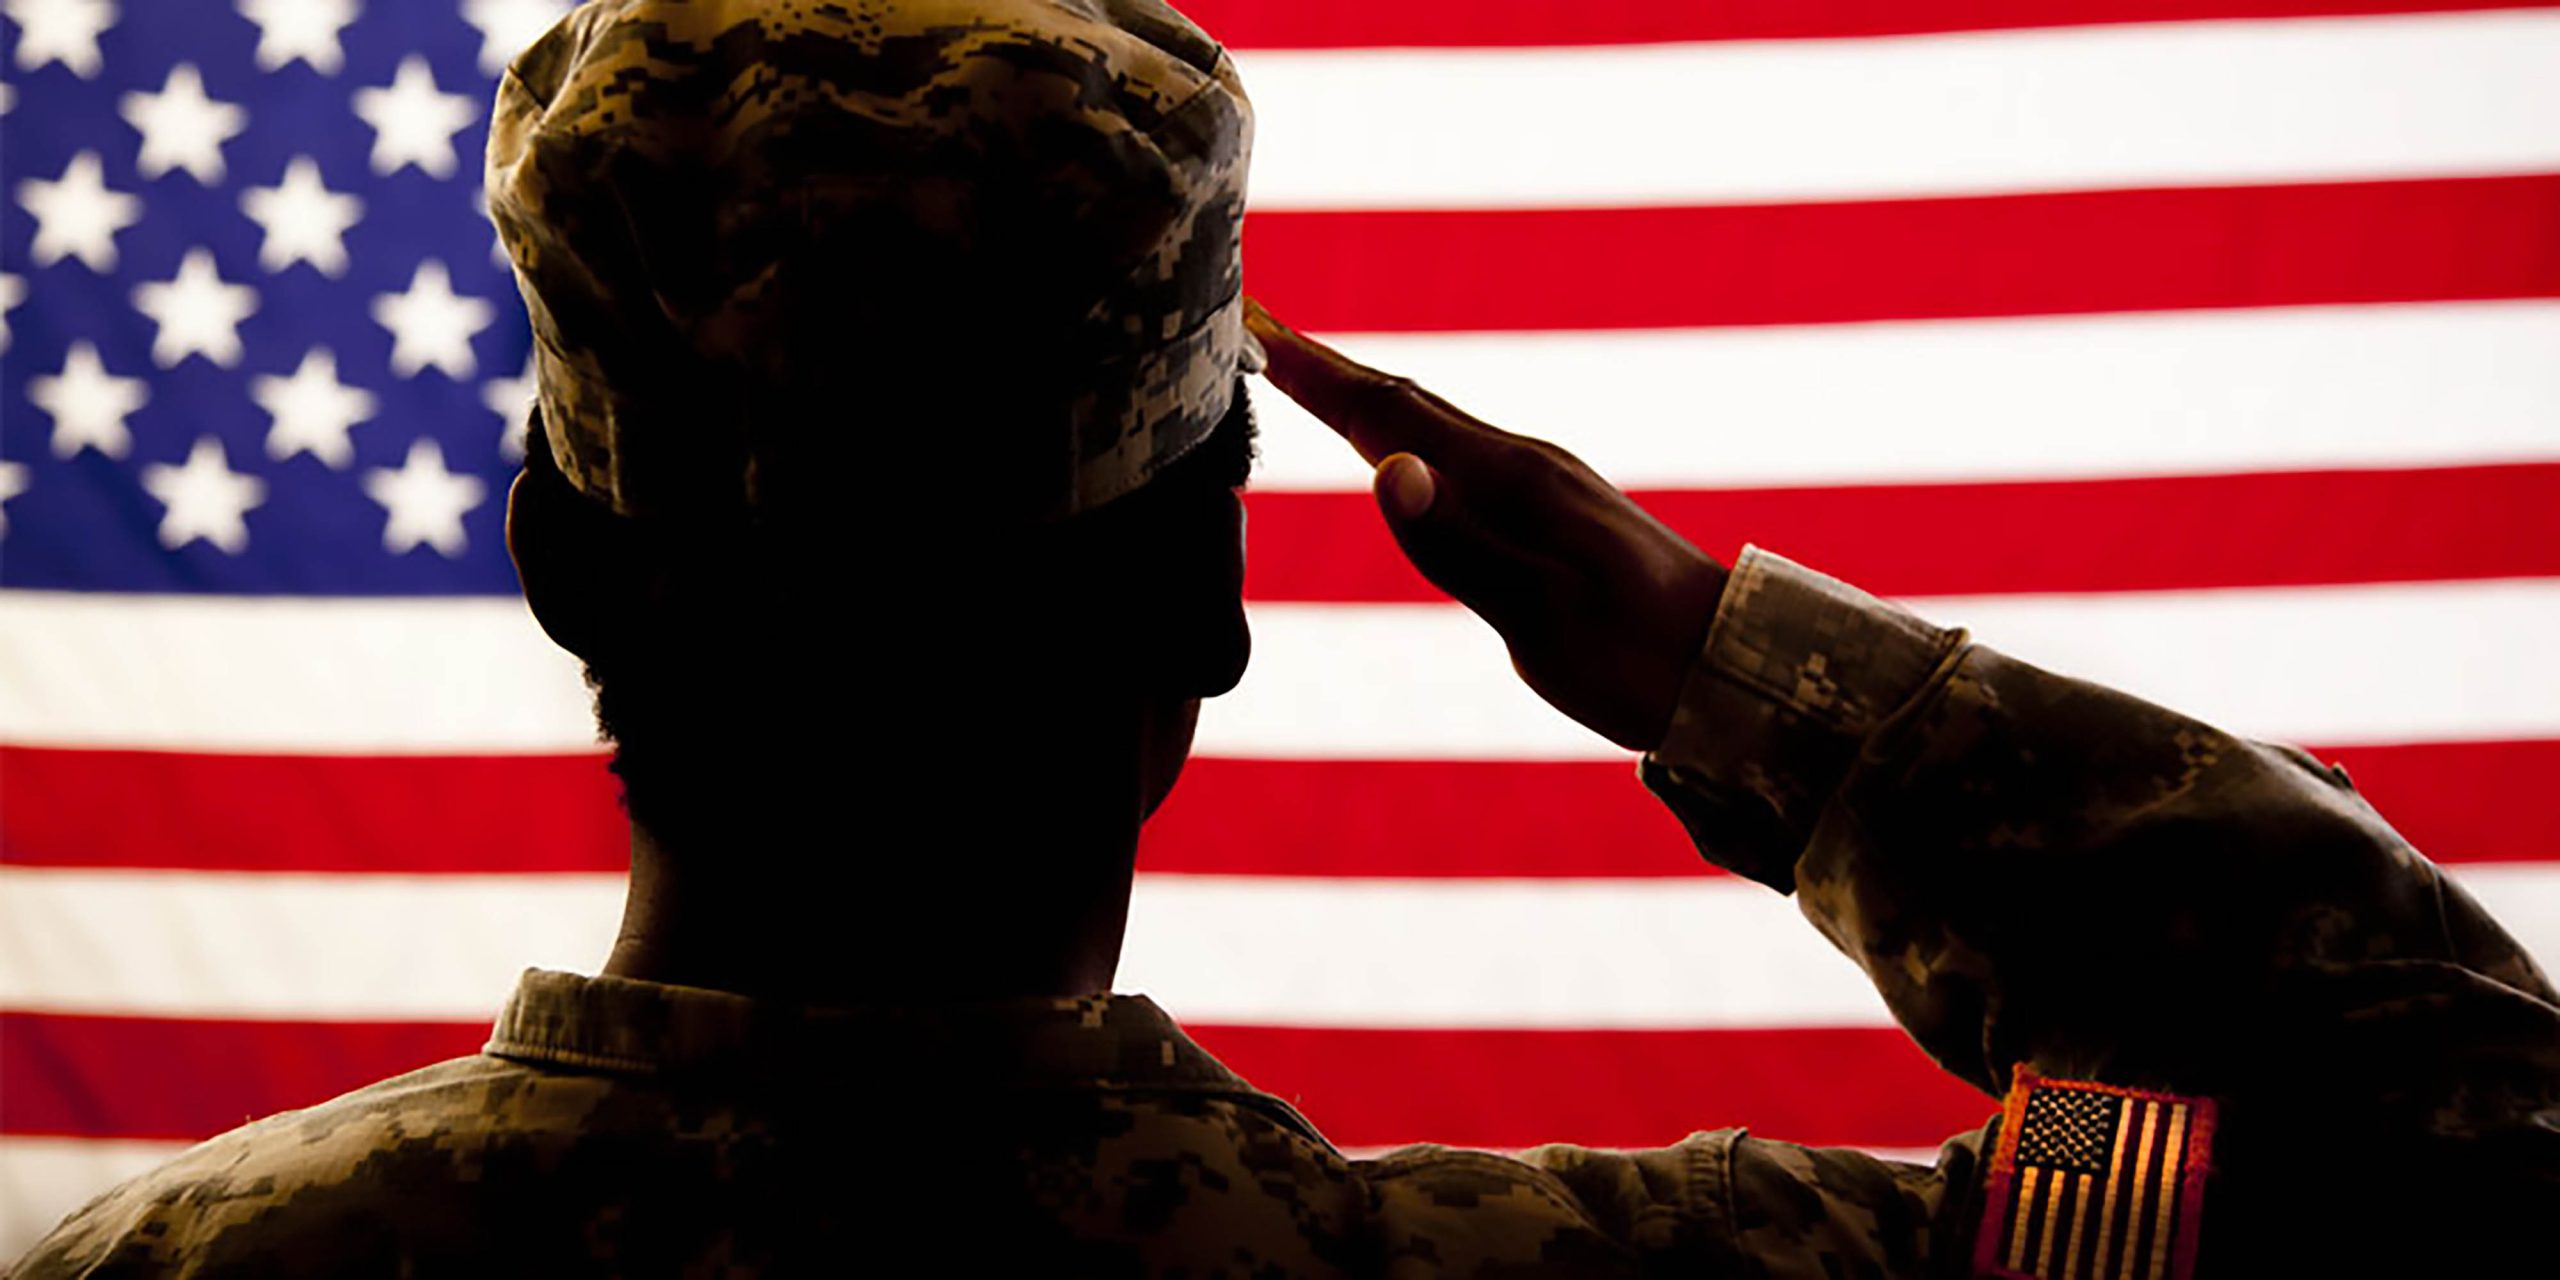 Background image of soldier saluting